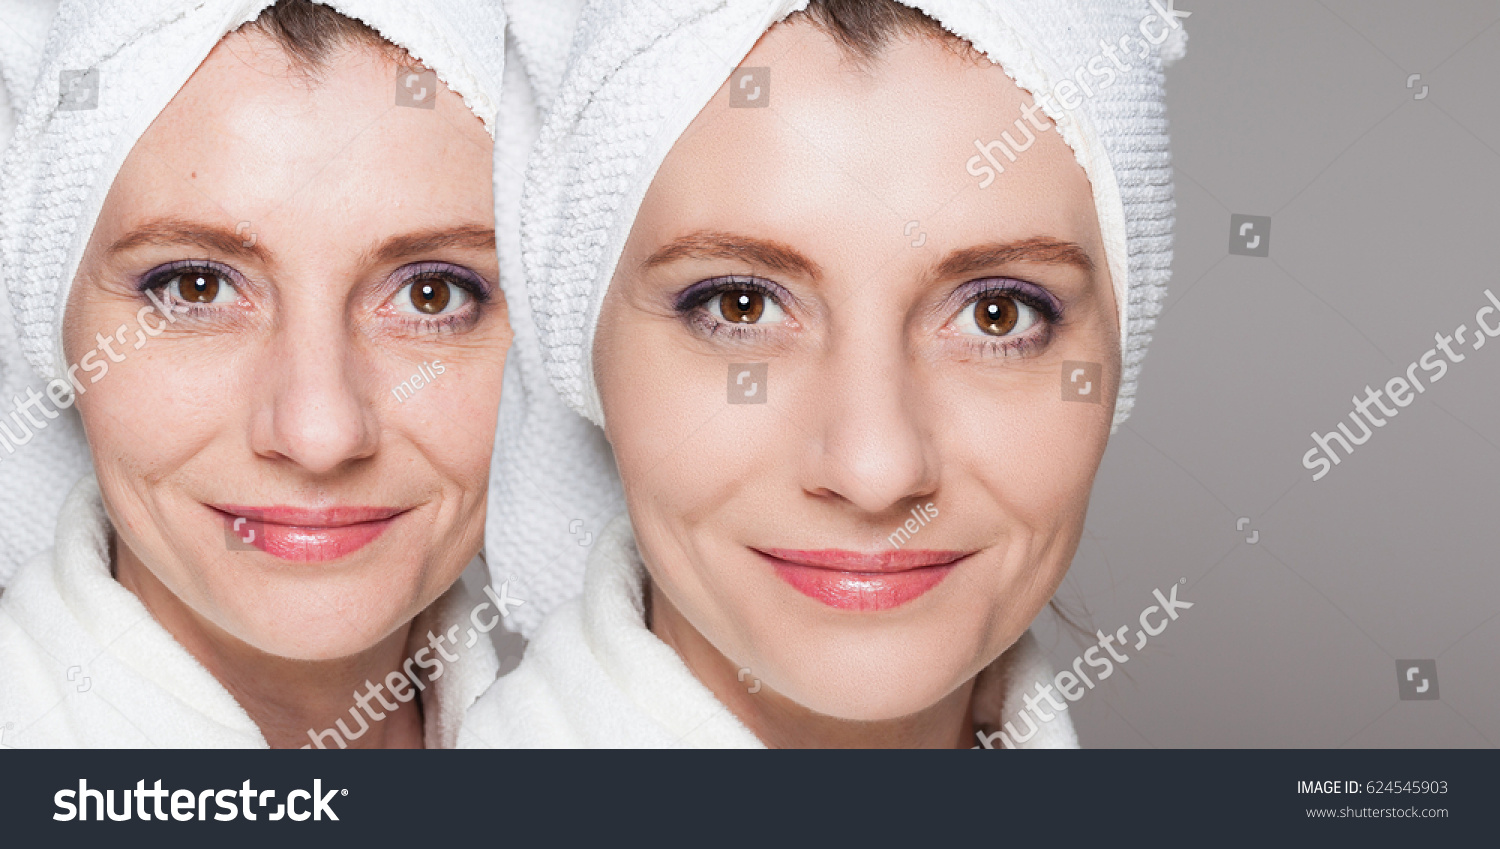 happy woman after beauty treatment - before/after shots - skin care, anti-aging procedures, rejuvenation, lifting, tightening of facial skin #624545903